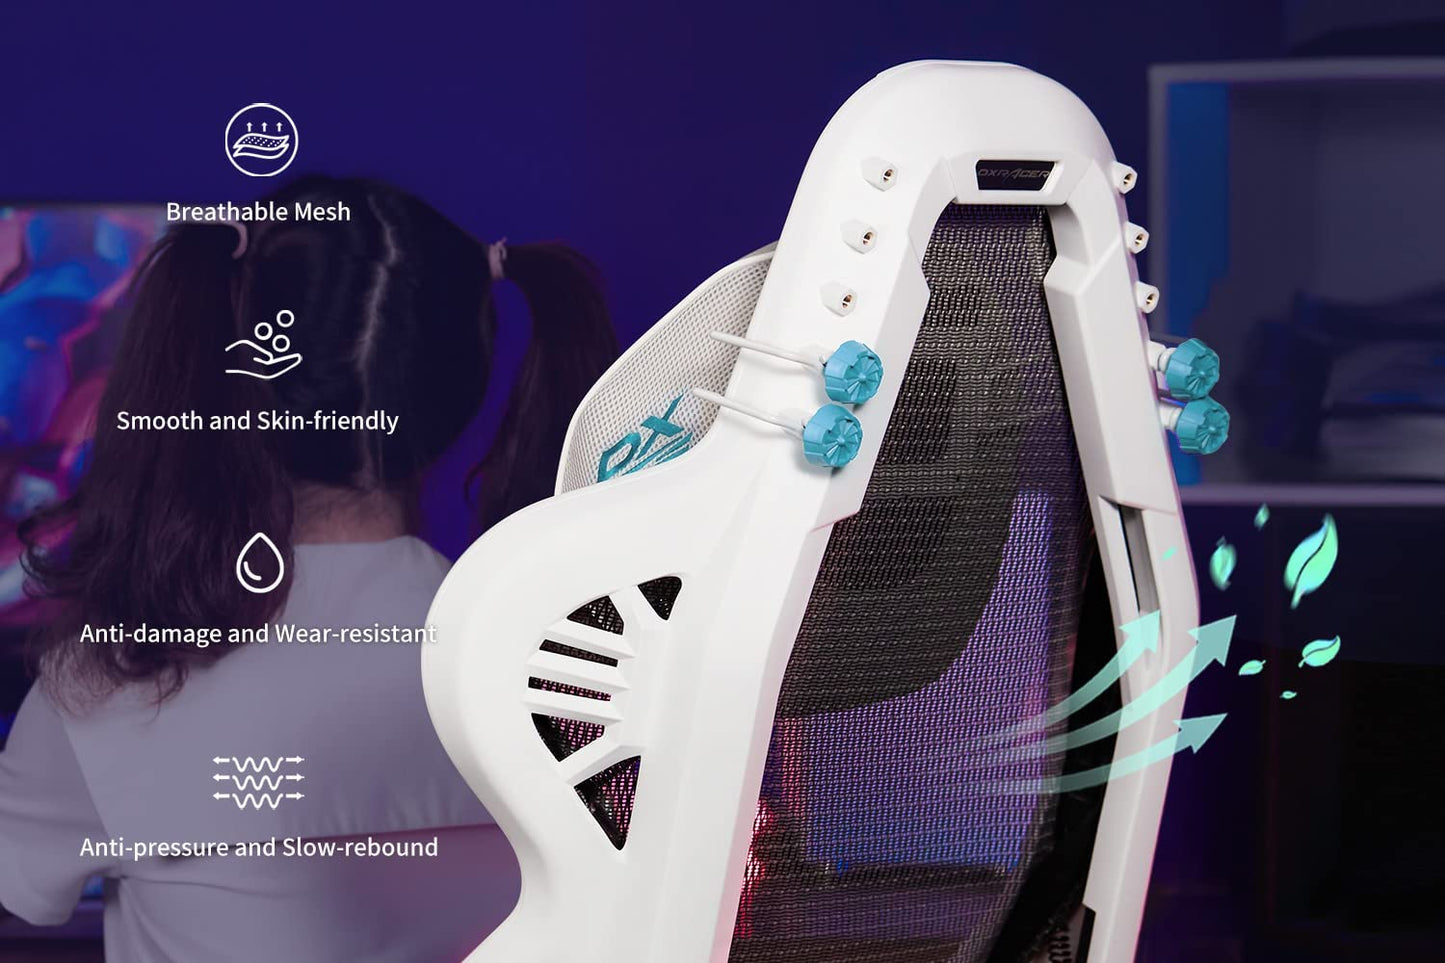 DXRacer Air Gaming Chair, Ultra-Breathable Mesh, 4D Armrests -White and Cyan (Pro)R15-WQ-G-B3